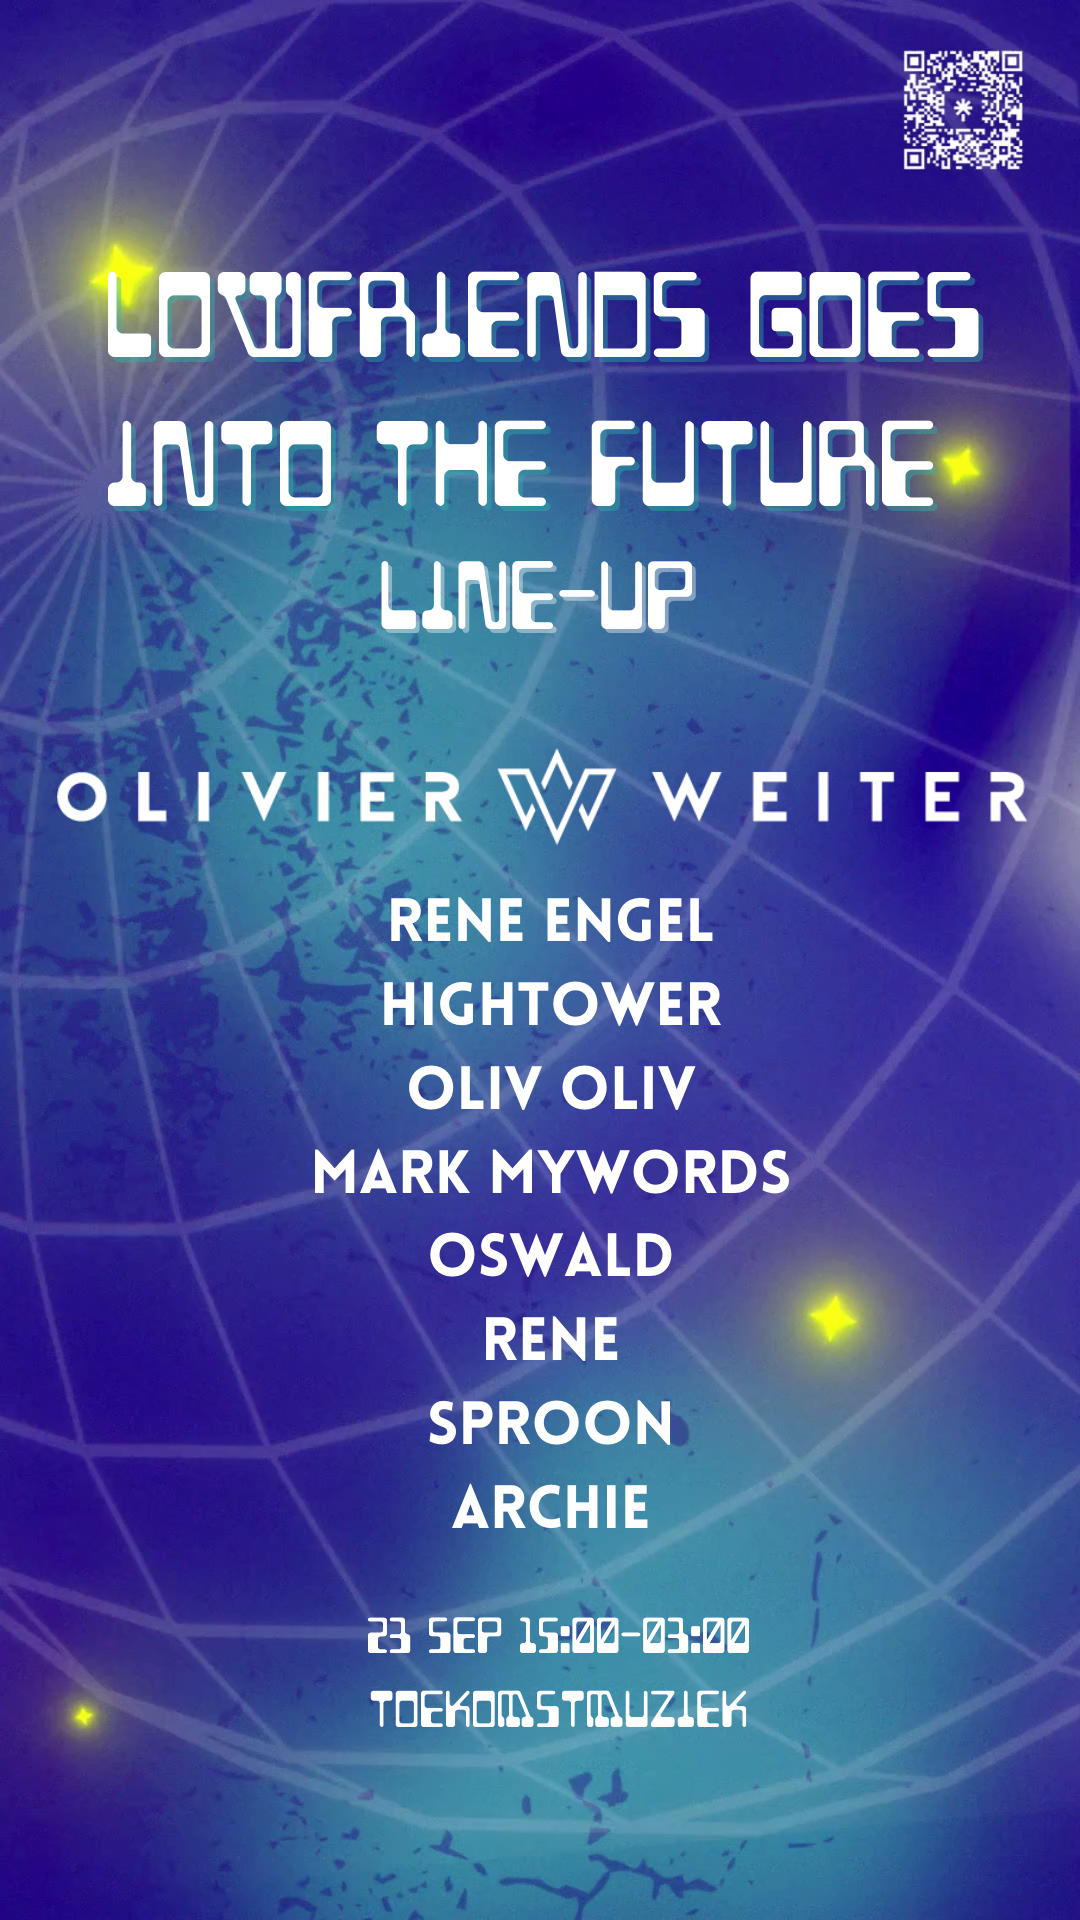 Lowfriends Goes Into The Future with special guest Olivier Weiter  - Página frontal